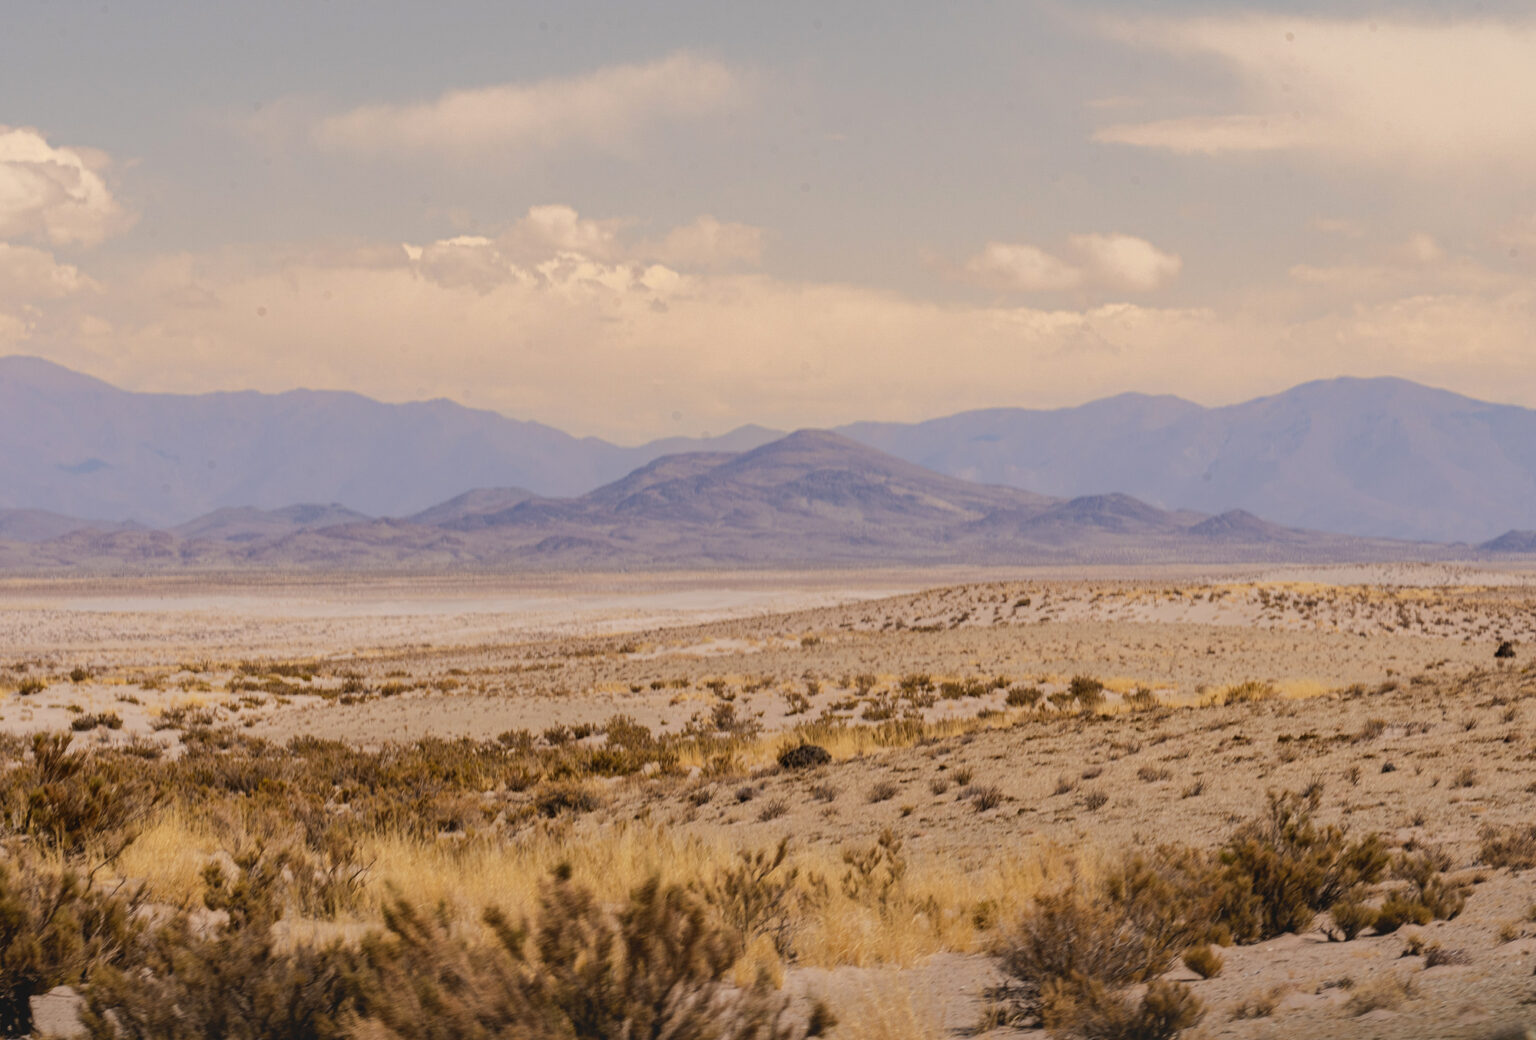 Desert landscape with mountains in the distance